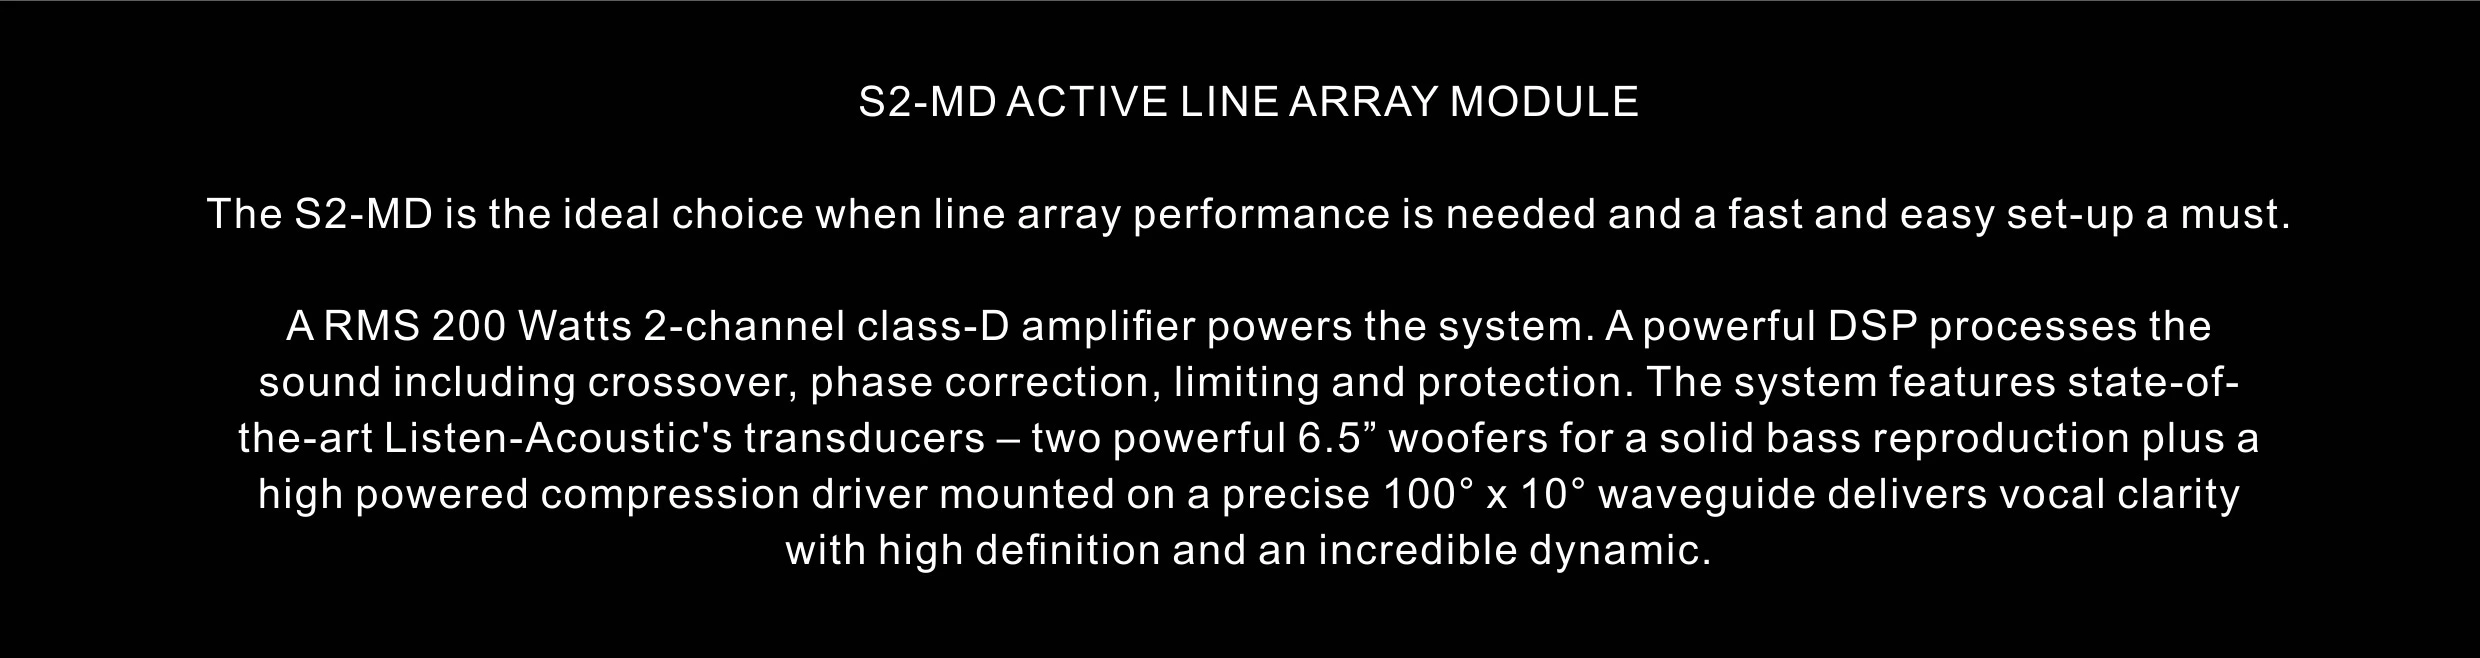 S2-MD ACTIVE LINE ARRAY MODULE The S2-MD is the ideal choice when line array performance is needed and a fast and easy set-up a must. A RMS 200 Watts 2-channel class-D amplifier powers the system. A powerful DSP processes the sound including crossover, phase correction, limiting and protection. The system features state-of- the-art Listen-Acoustic's transducers – two powerful 6.5” woofers for a solid bass reproduction plus a high powered compression driver mounted on a precise 100° x 10° waveguide delivers vocal clarity with high definition and an incredible dynamic.